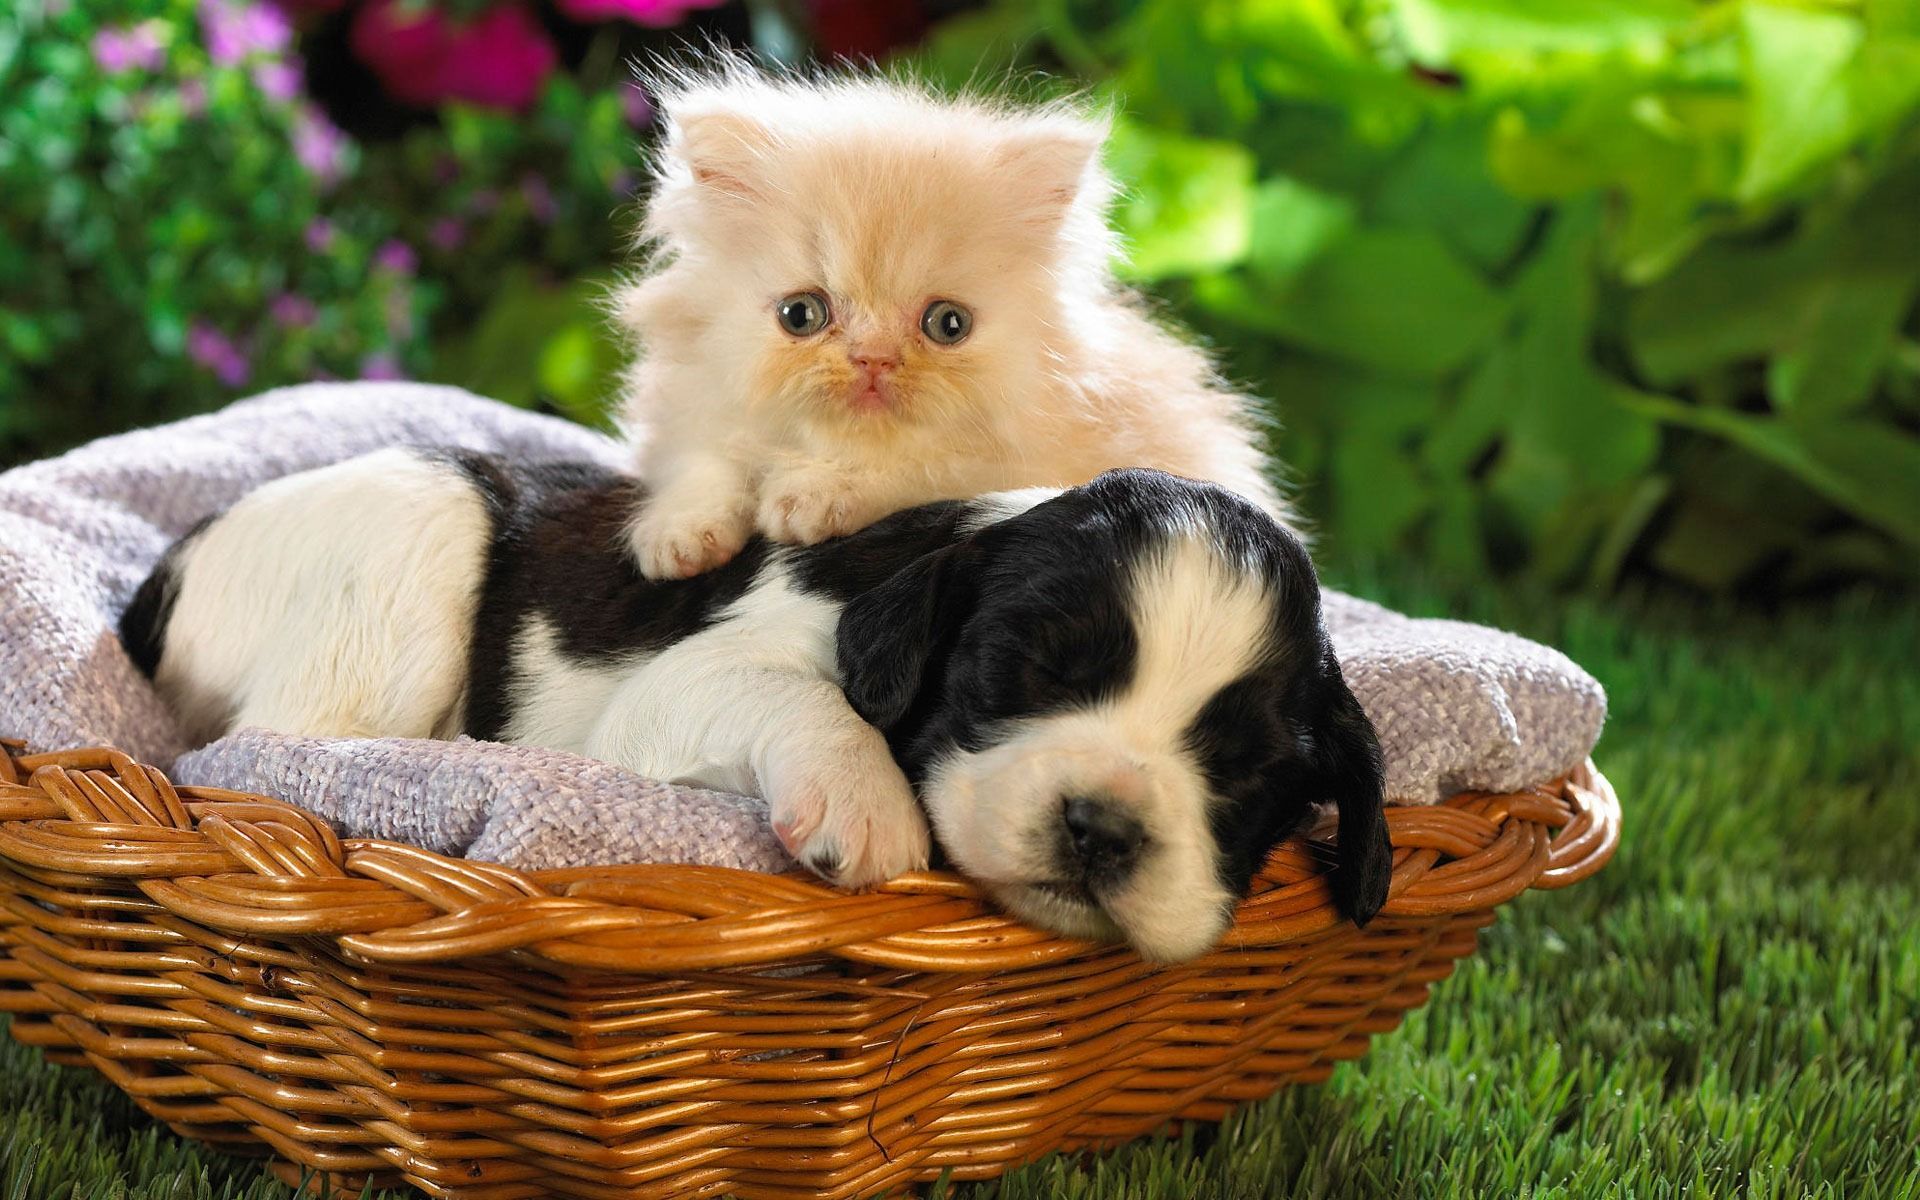 cute cats and dogs picture. cute cat and dog thumb desktop wallpaper download cute cat and do. Cute puppies and kittens, Cute cats and dogs, Kittens and puppies